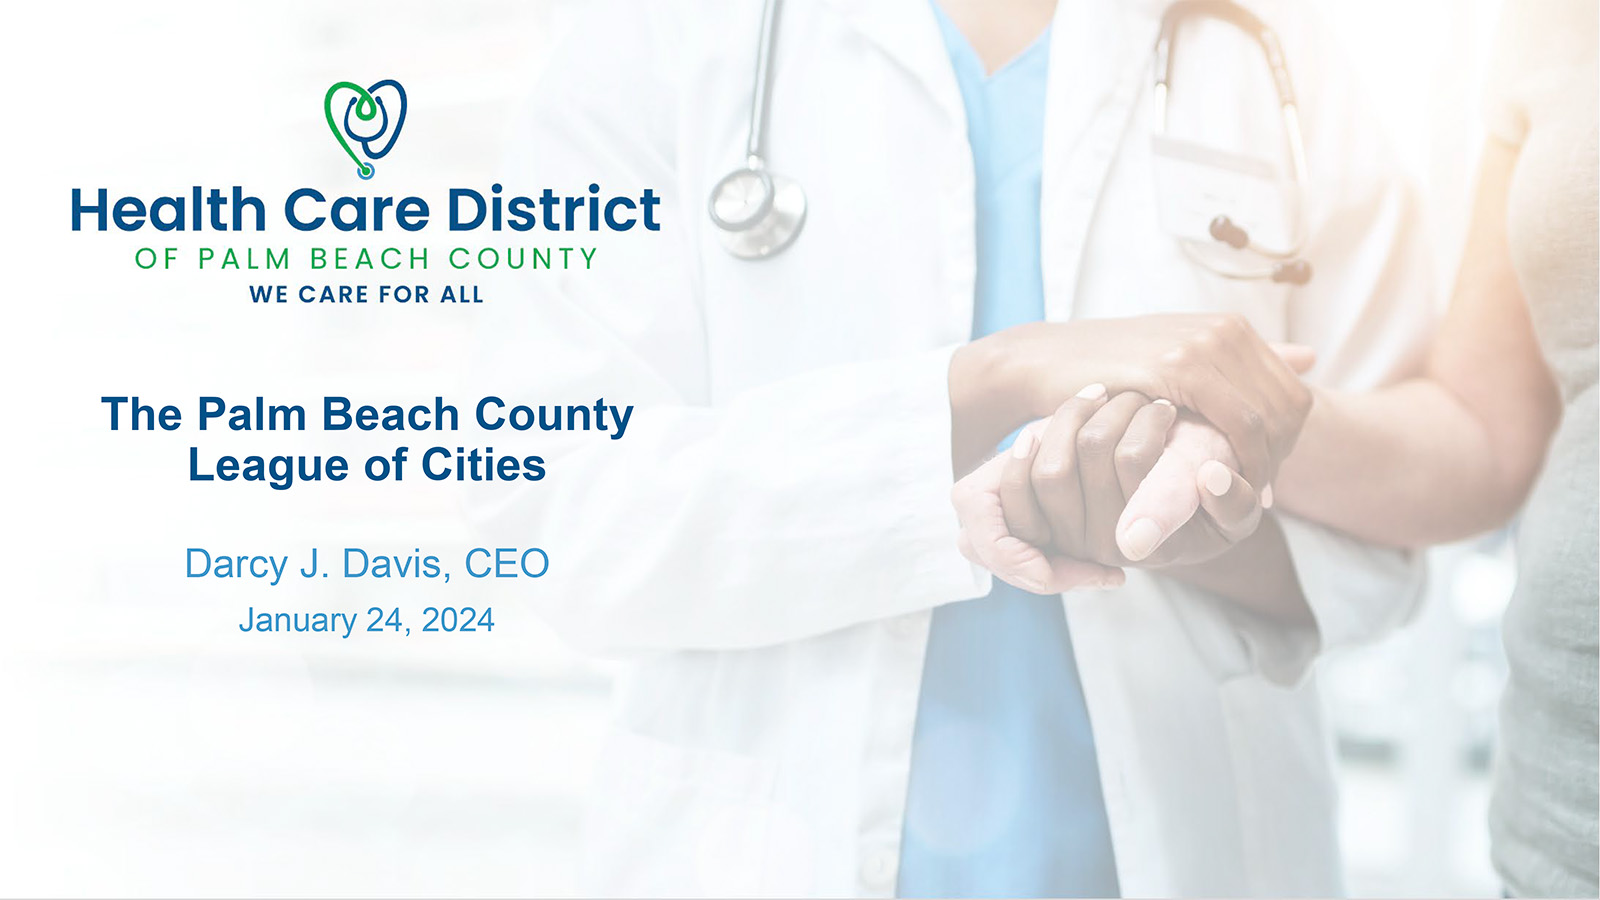 Health Care District of Palm Beach County League of Cities presentation showing doctor in background clasping hands with a patient - click here to download the entire presentation in PDF format